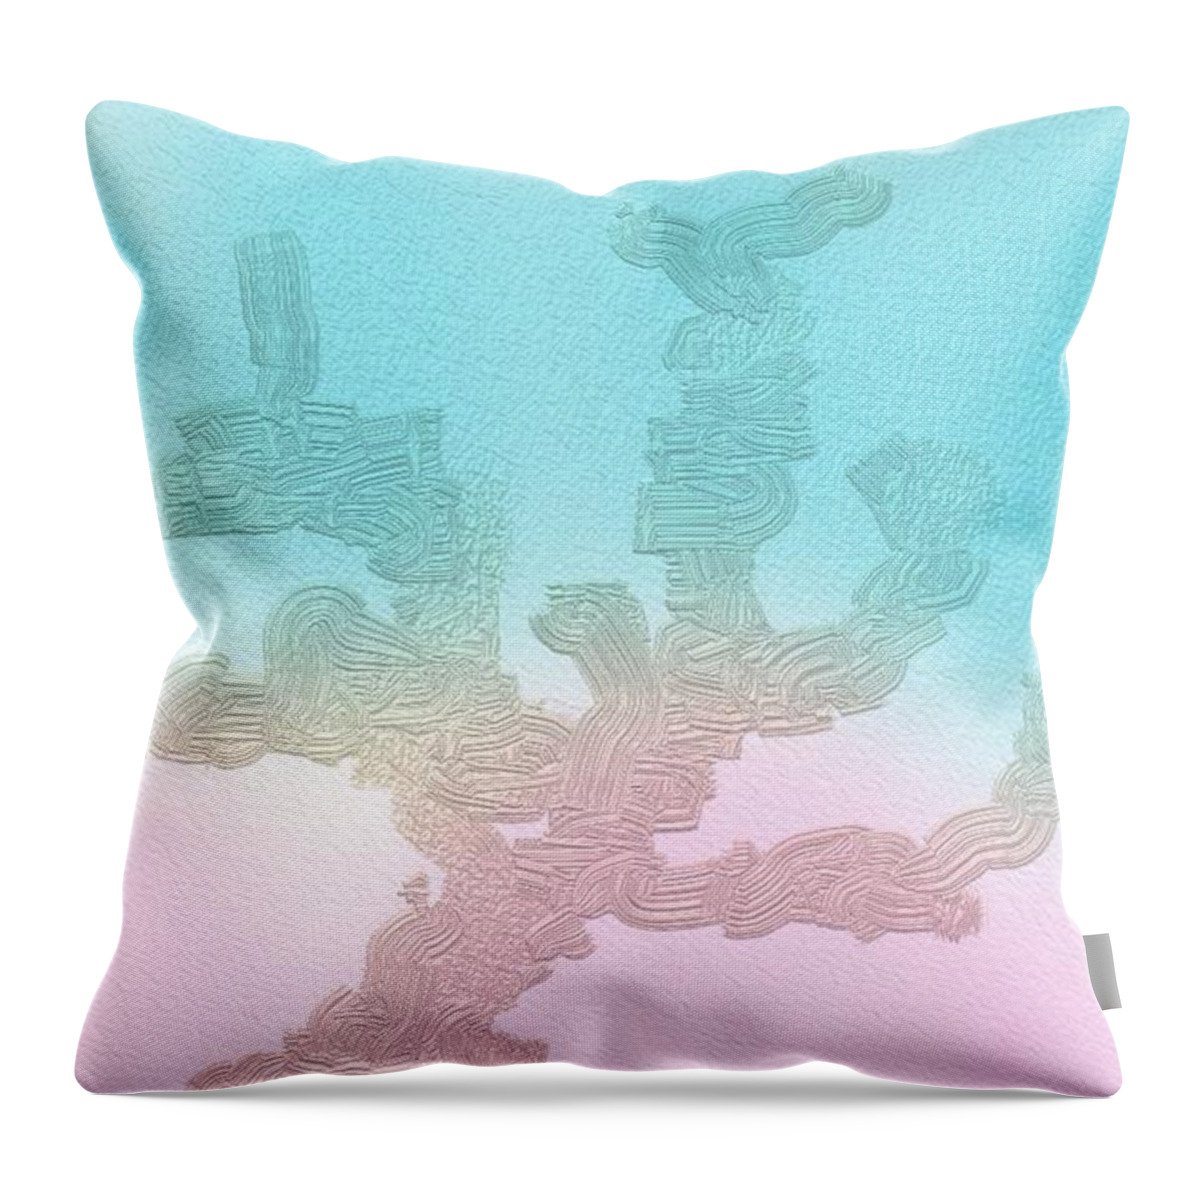 Nature Throw Pillow featuring the digital art Desert Tree by Naomi Jacobs